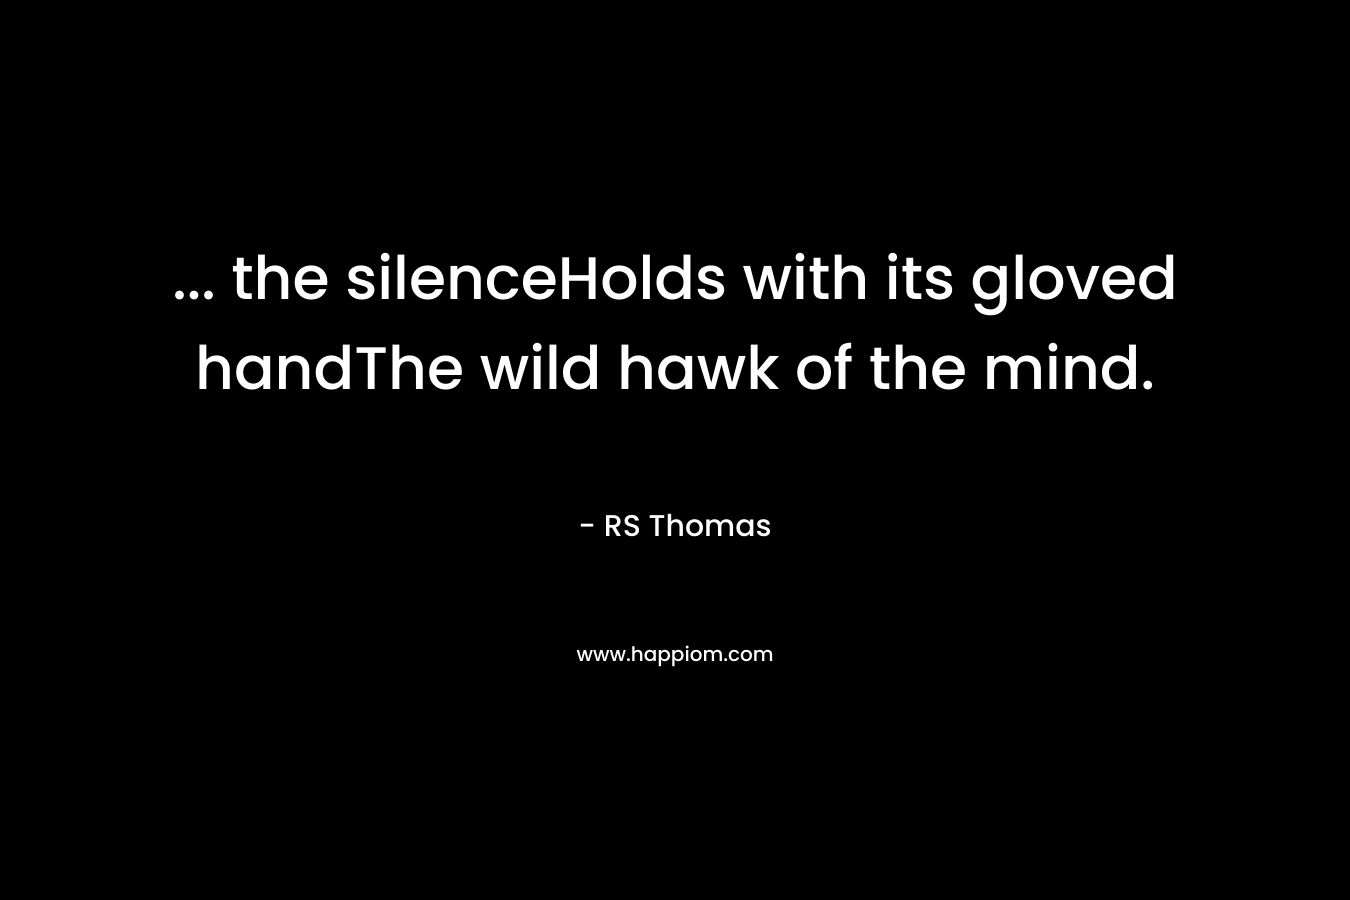 ... the silenceHolds with its gloved handThe wild hawk of the mind.